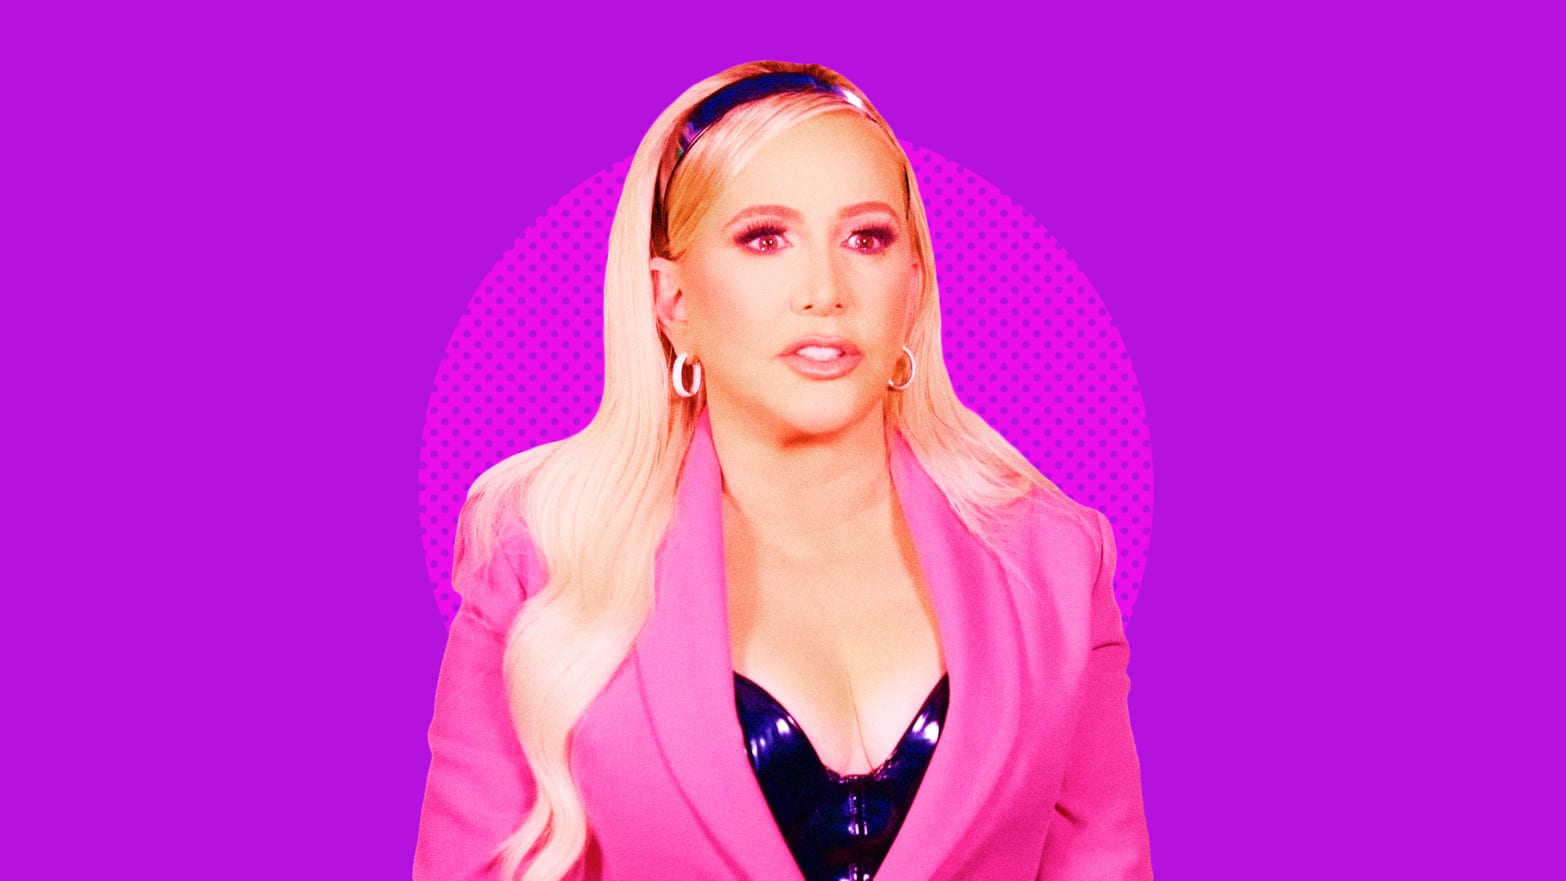 RHOC Recap Shannon Beador Has an Epic Real Housewives Meltdown pic